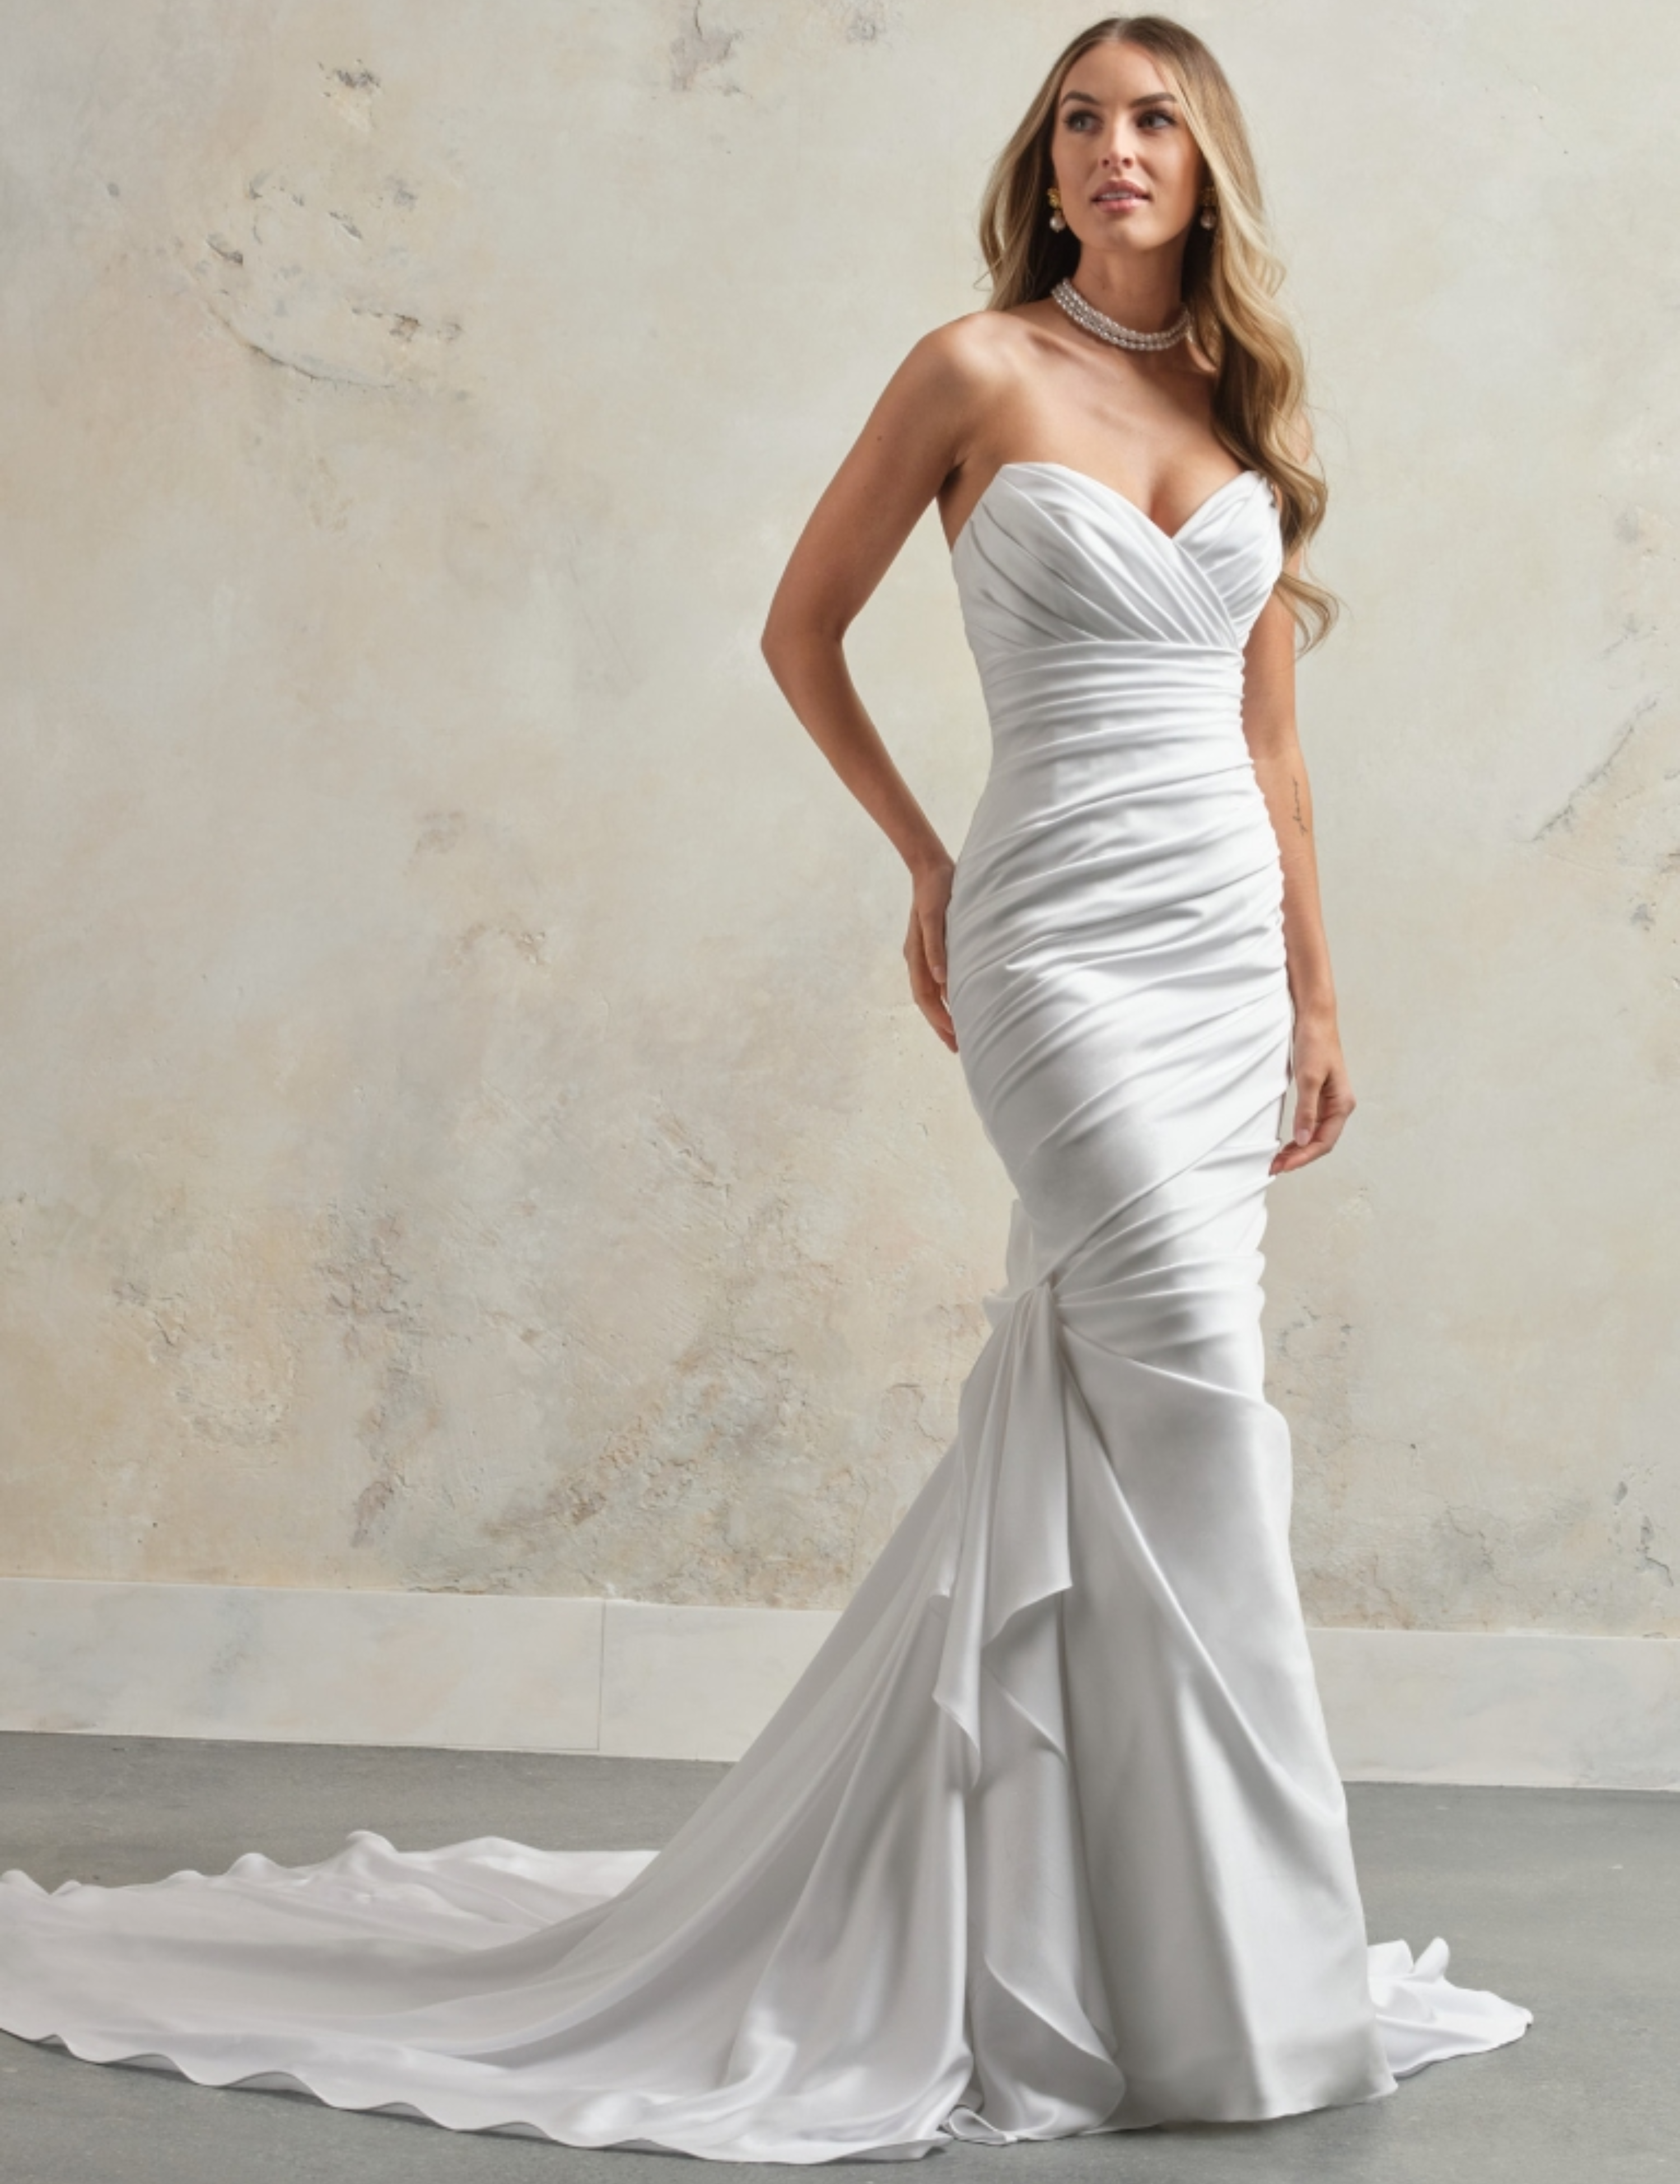 Dramatically Draped Satin Fit-and-Flare Wedding Dress by Maggie Sottero - Image 1